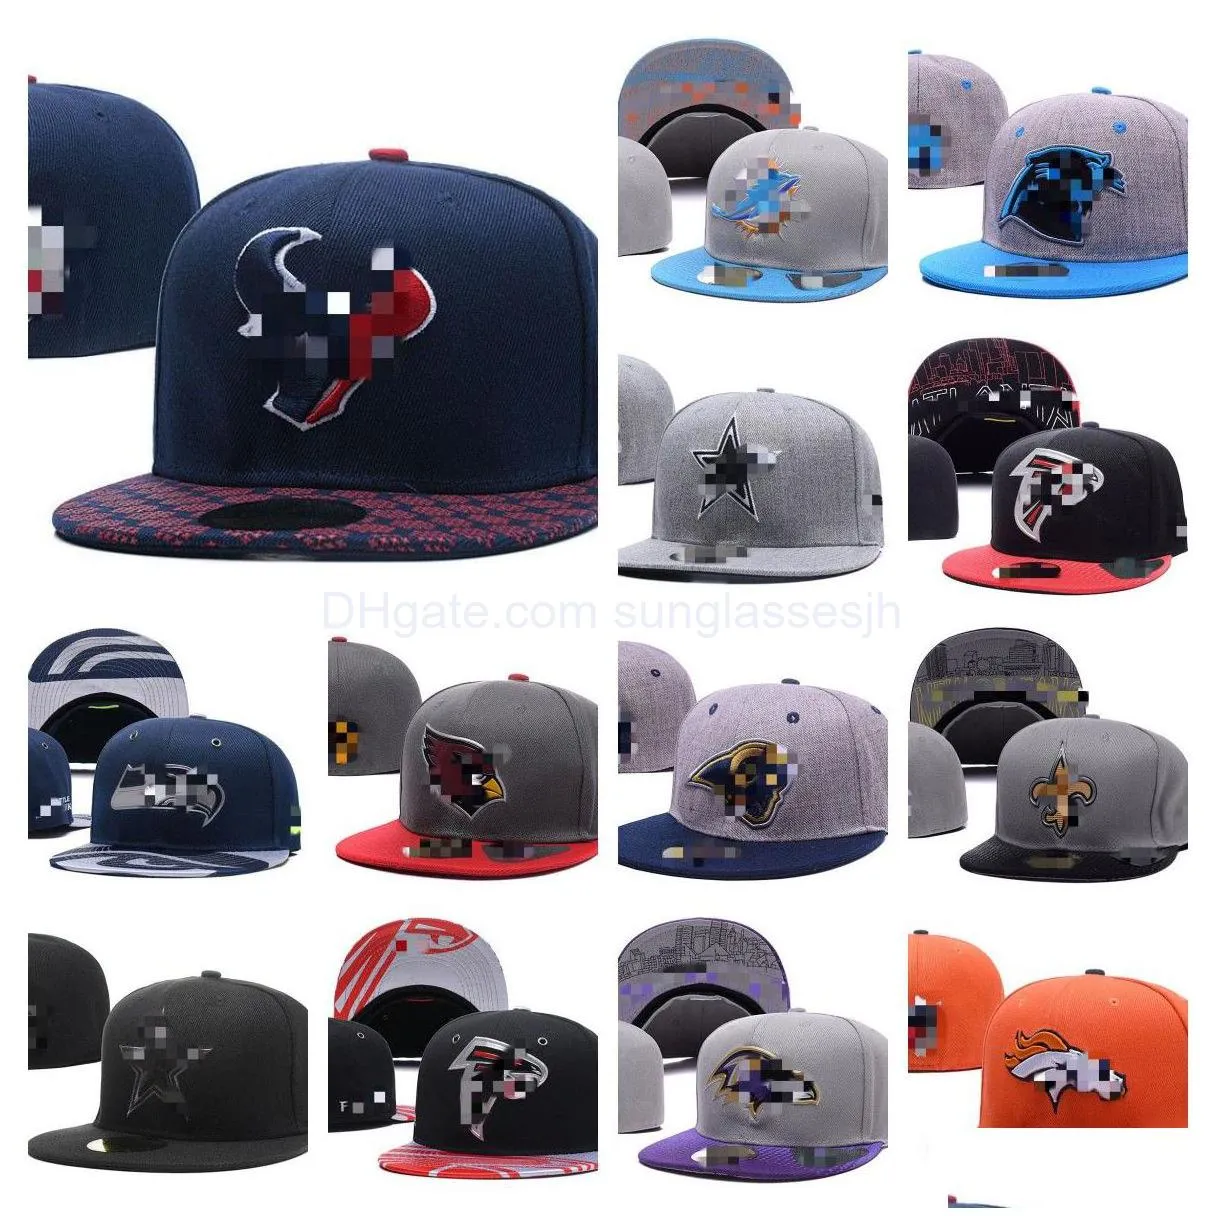 designer hats fashion all team baseball snapbacks fitted letter caps wholesale sports outdoor embroidery cotton flat full closed hat mix order for base ball